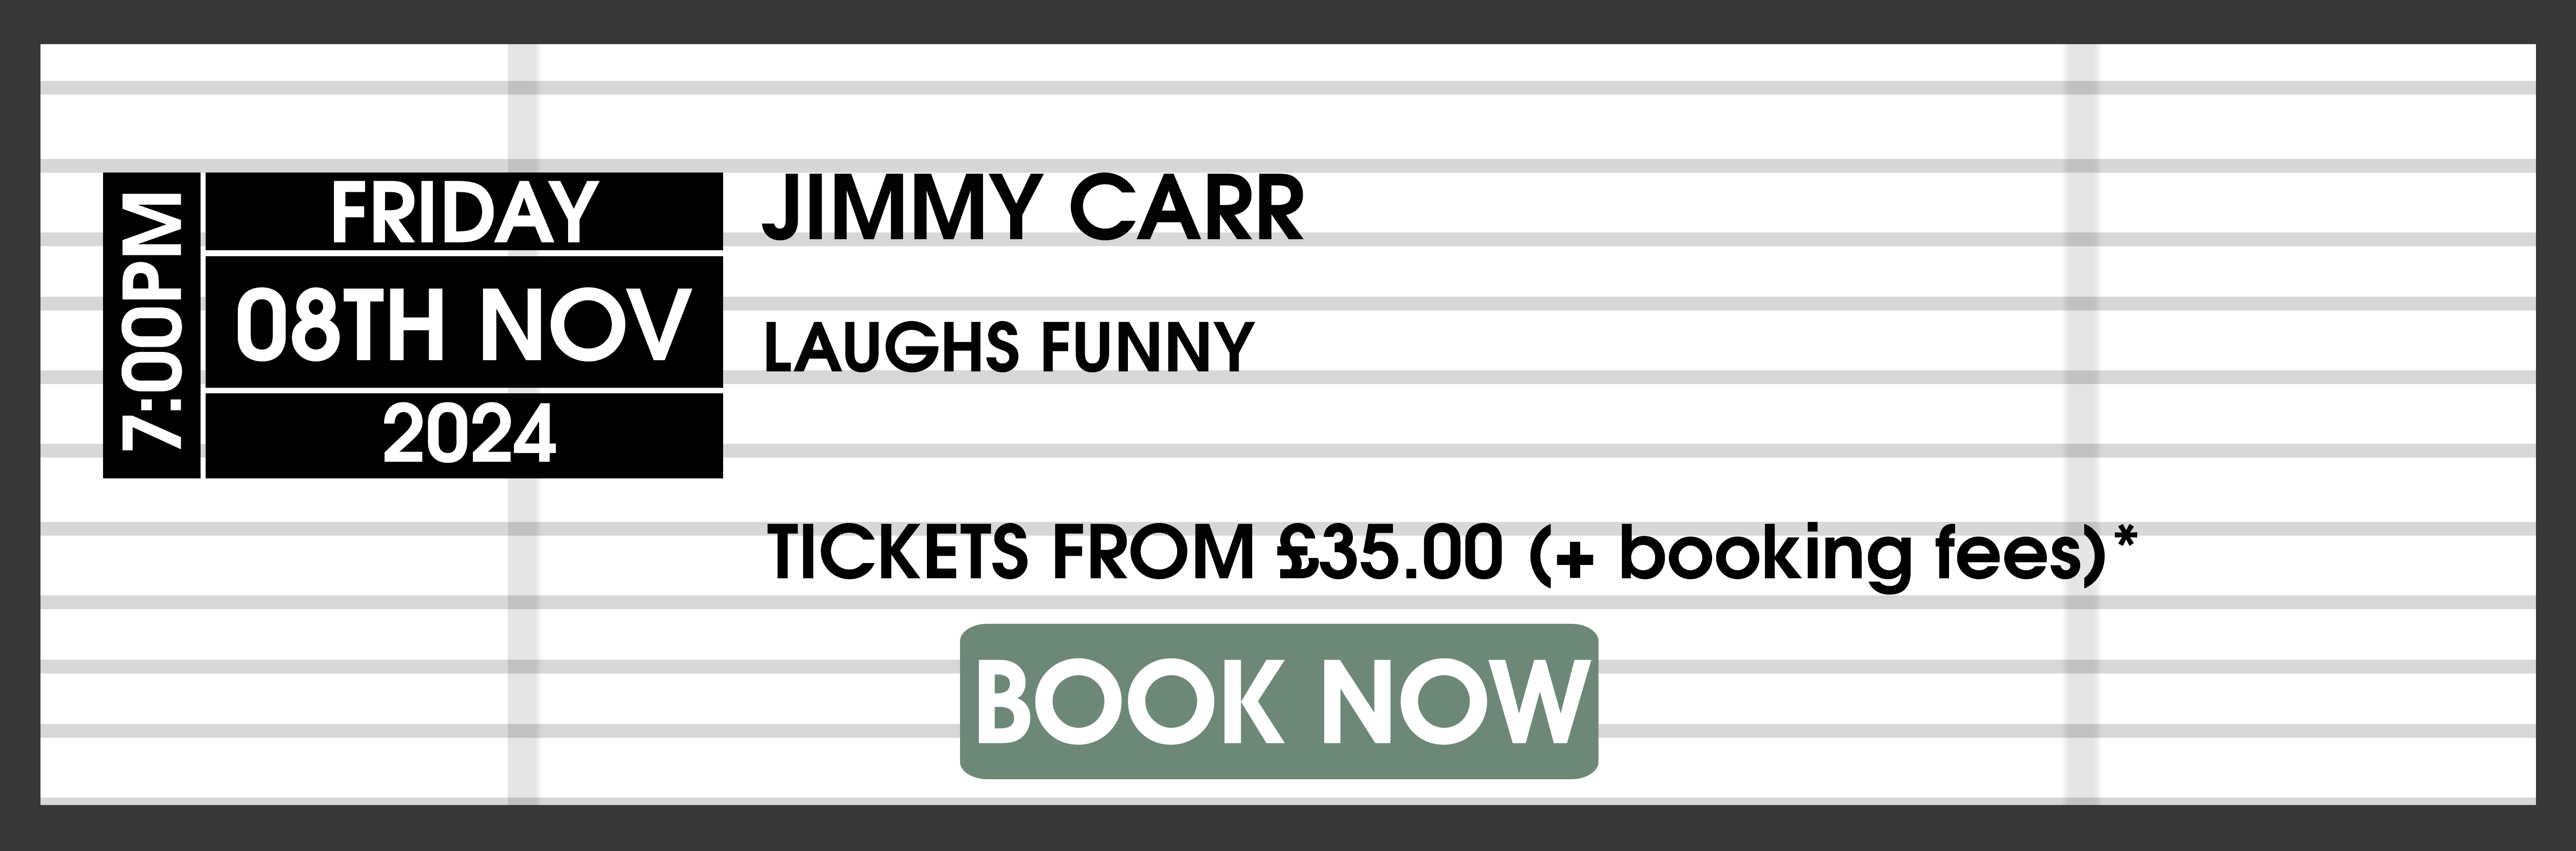 8.11.24 Jimmy Carr BOOK NOW 1